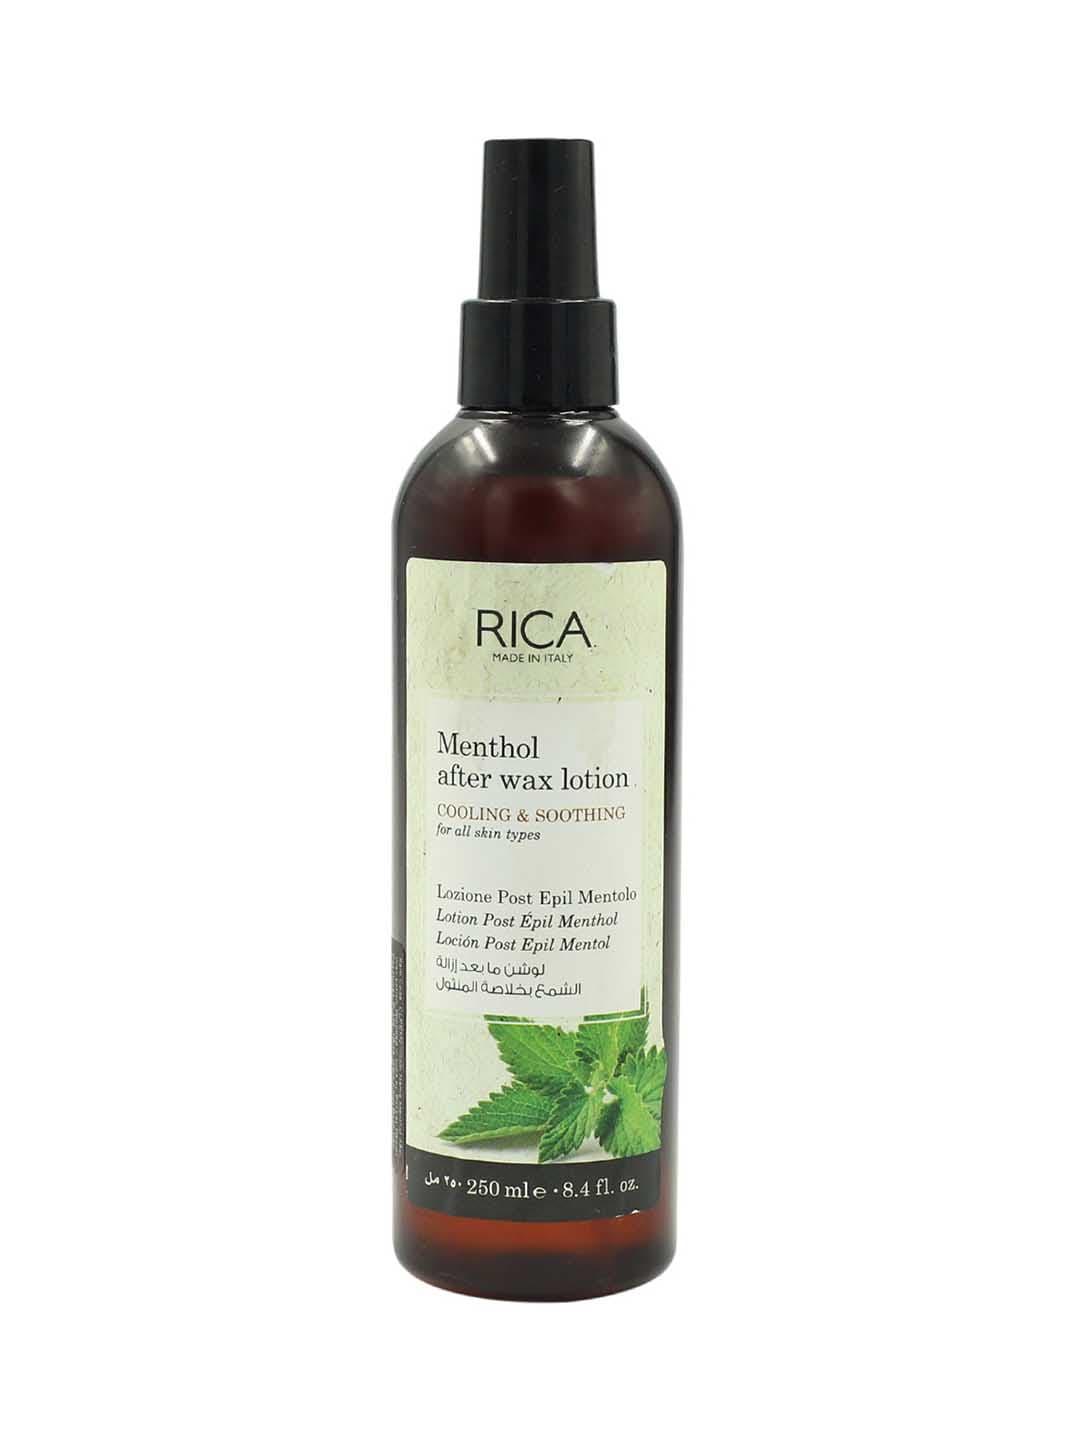 RICA Unisex Menthol After Wax Lotion